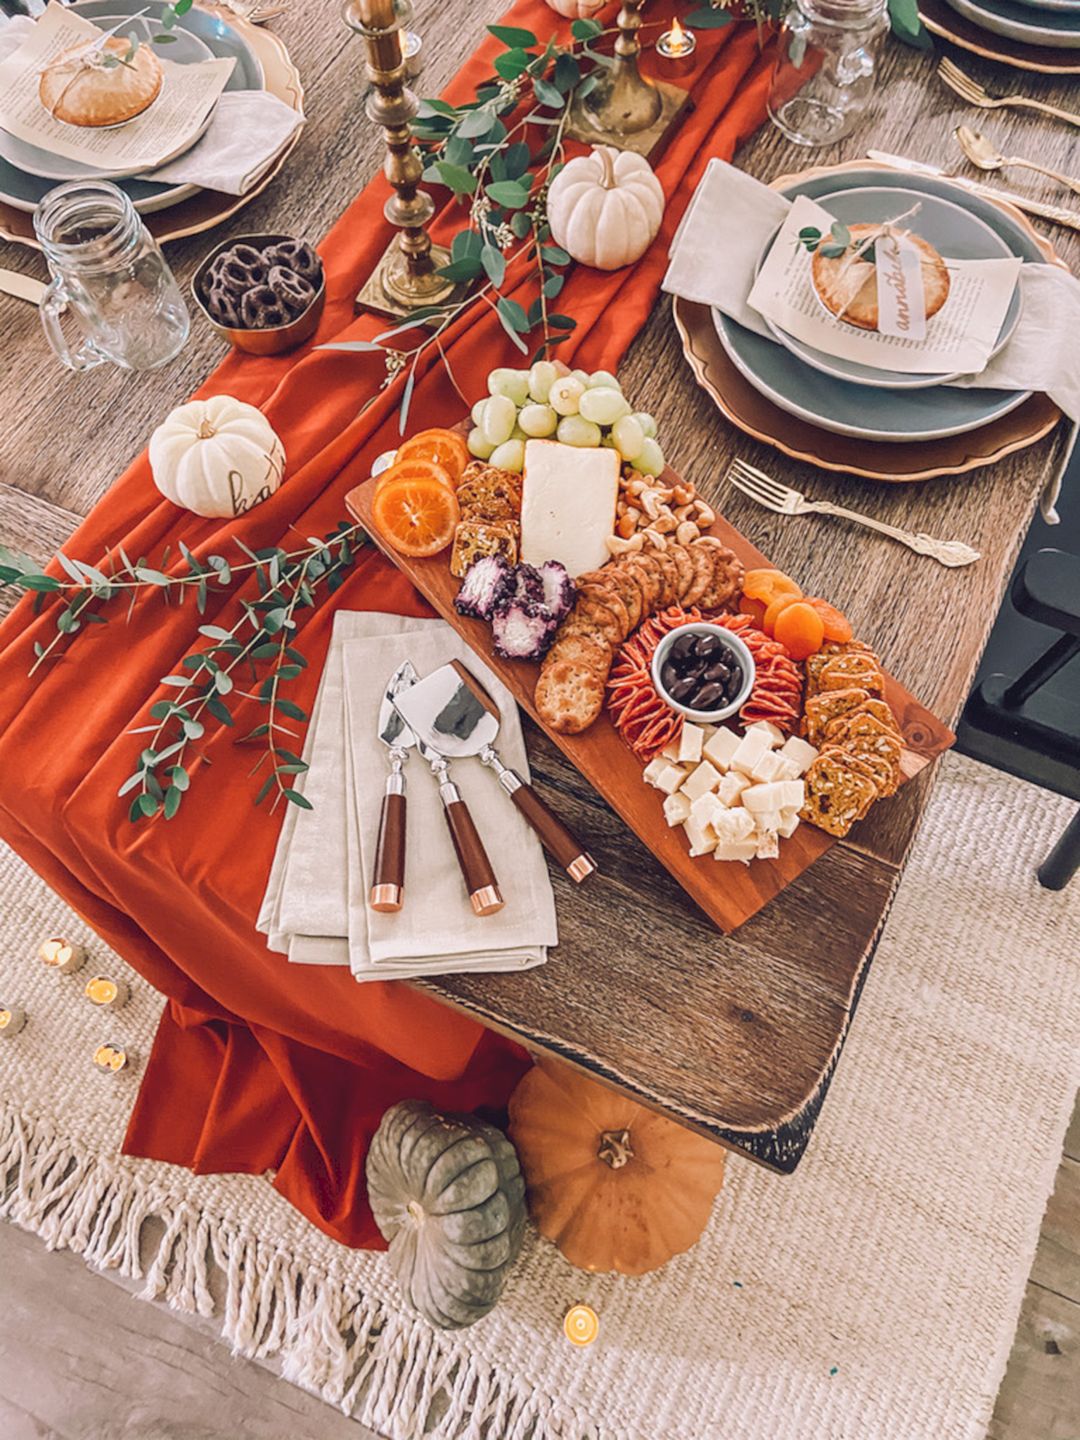 Thanksgiving Table With Greenery And Food From Lifebyleanna